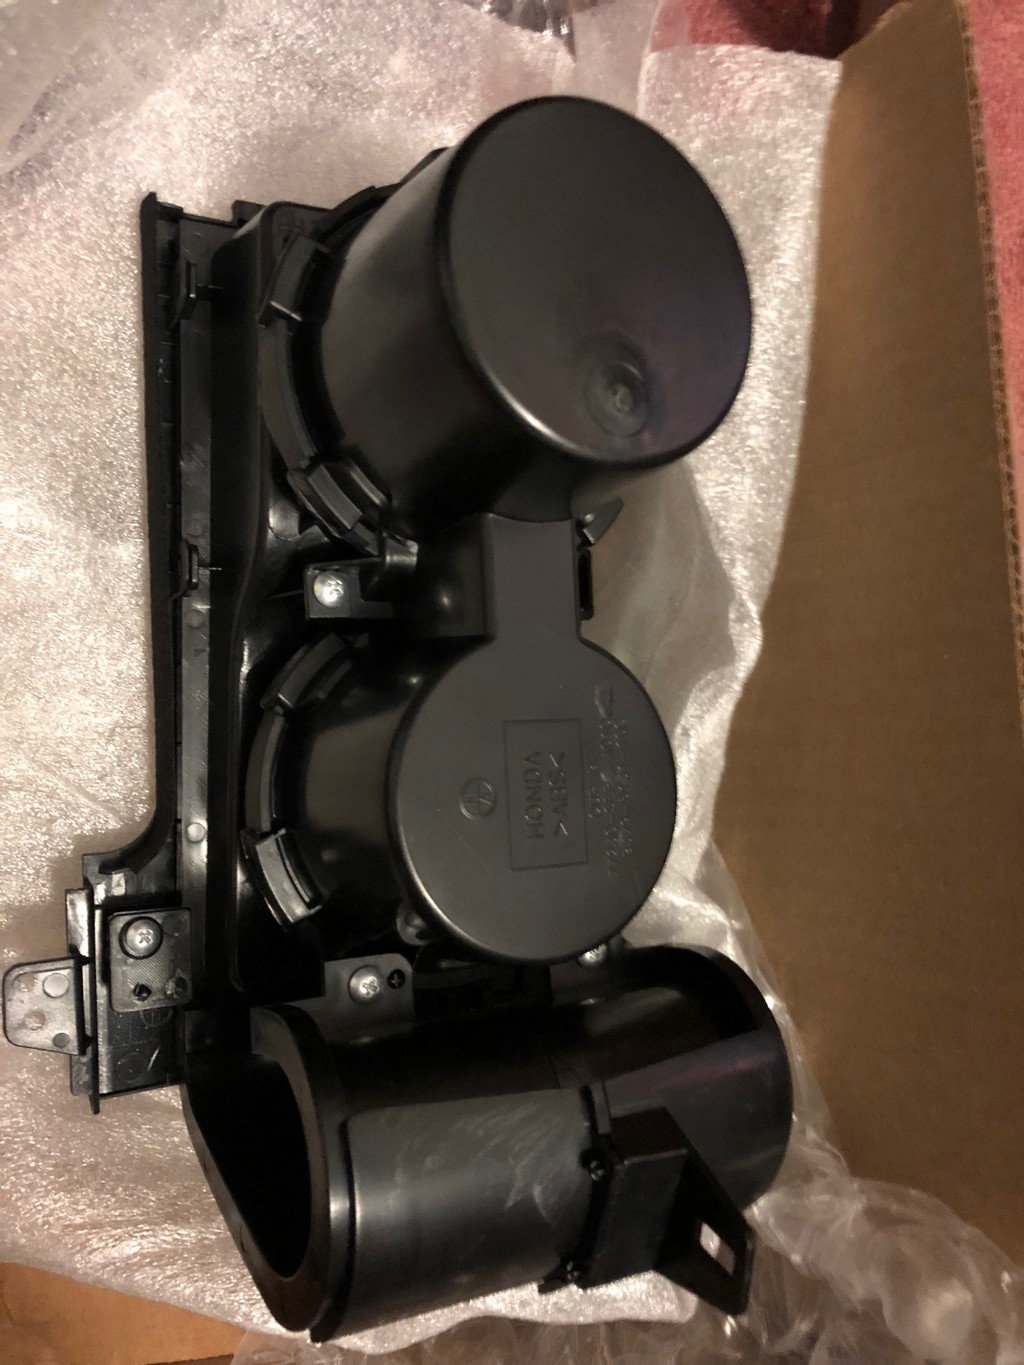 2008 Acura TL - 2004-2008 Acura TL OEM Cup Holder (Brand New) - Interior/Upholstery - $90 - Los Angeles, CA 91775, United States